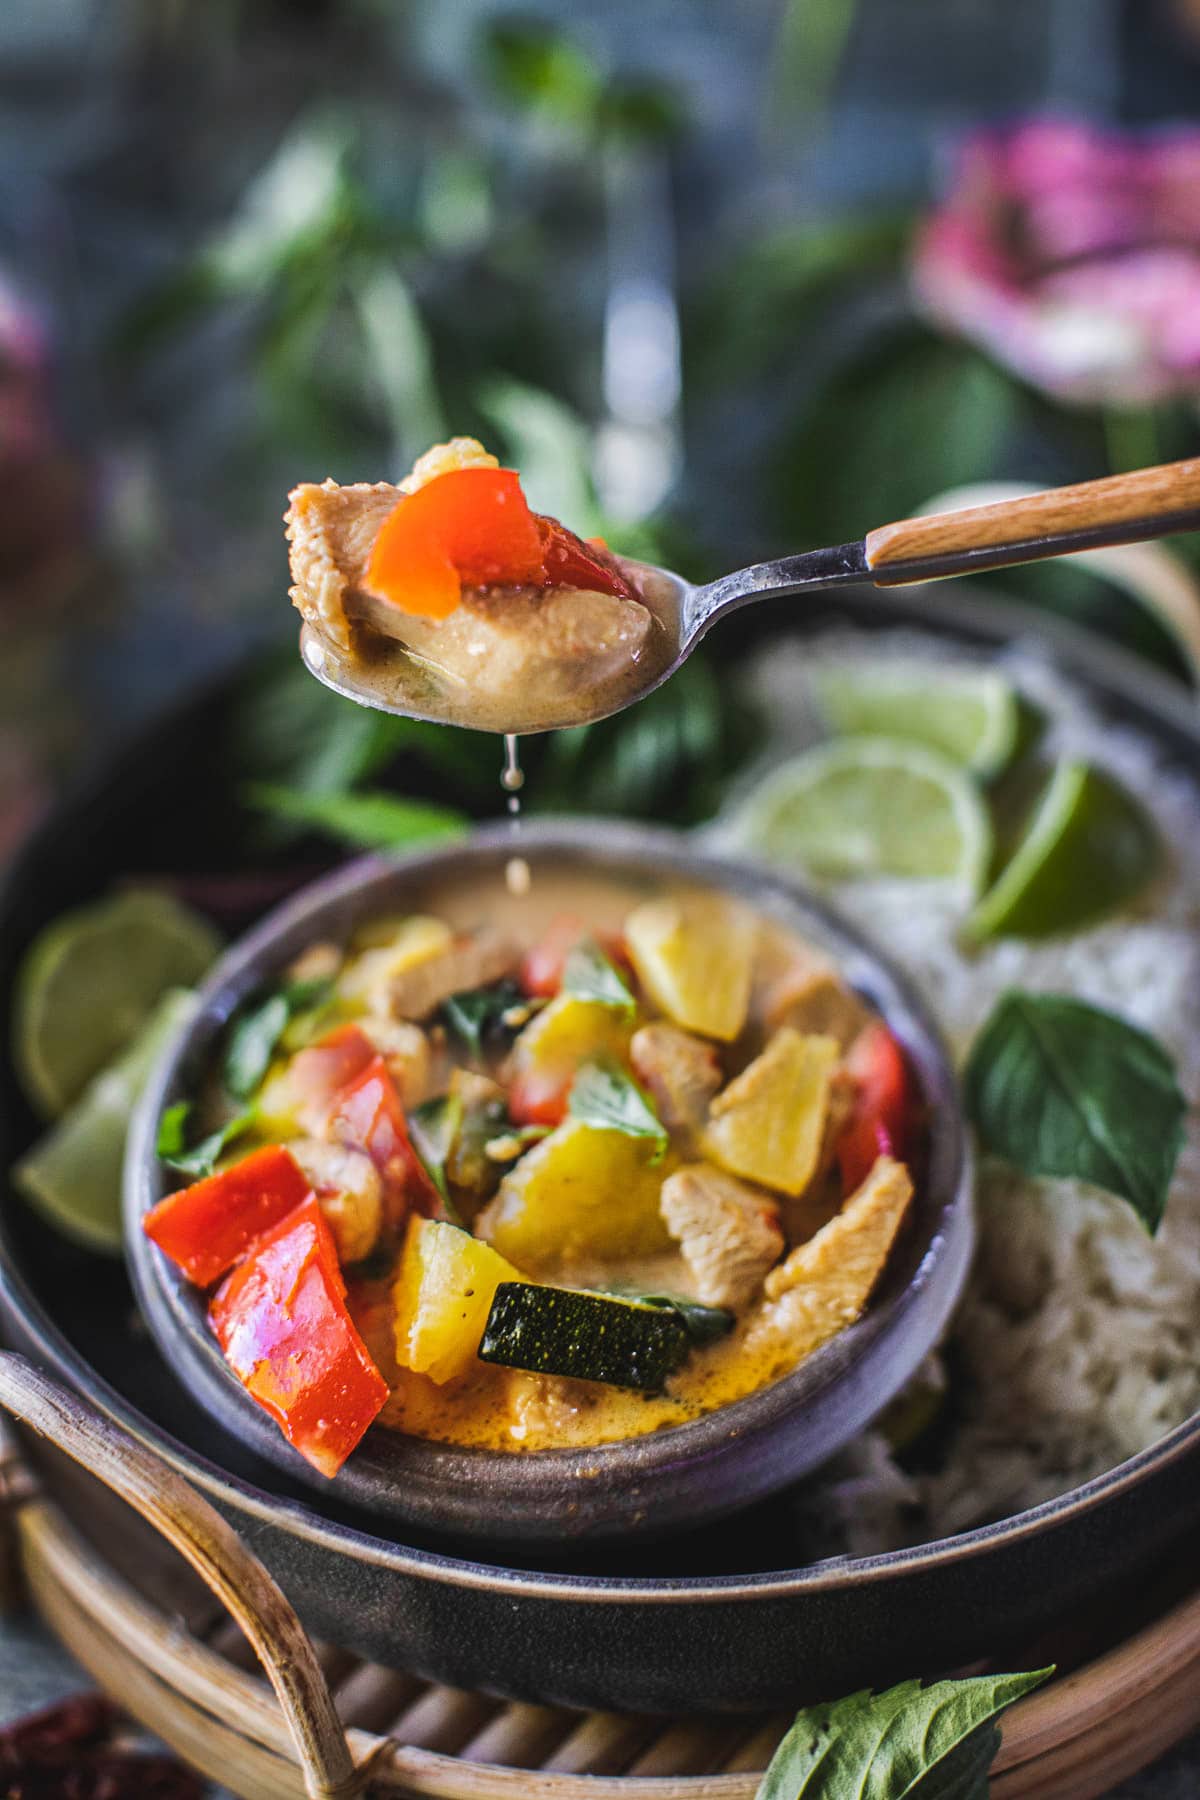  Thai Pineapple Curry is a quick and easy meal to whip up.   This delicious, 20-minute version is full of healthy vegetables,  fresh pineapple, and your choice of Chicken, Shrimp or Tofu, and bathed in the most fragrant coconut red curry sauce. Vegan-adaptable. 